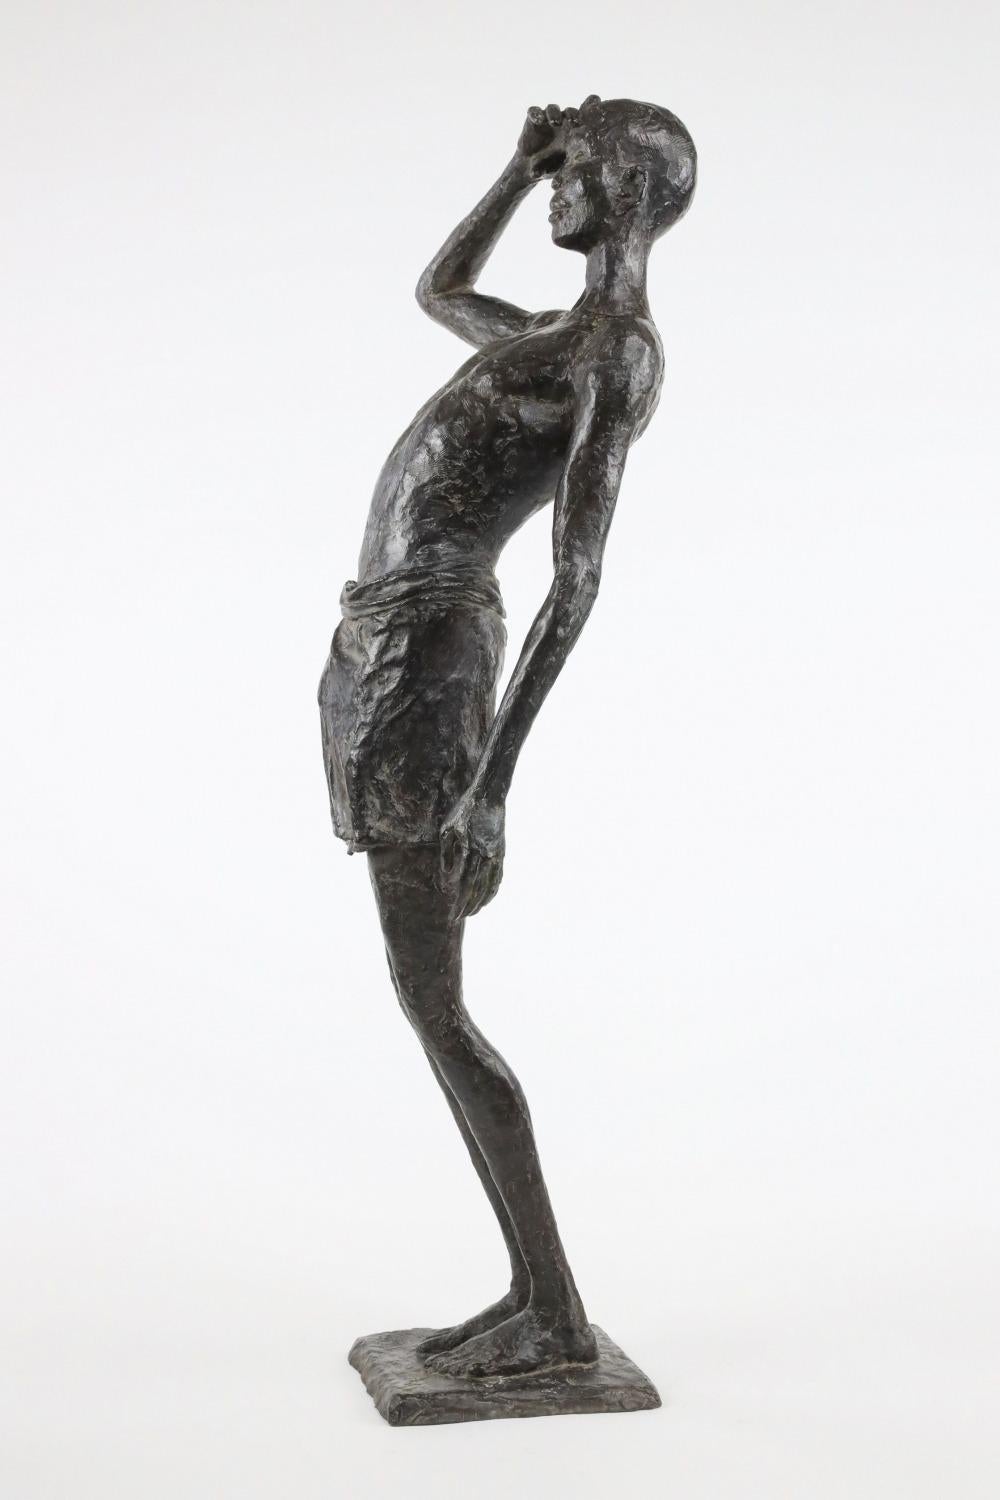 The Waiting Time by Marine de Soos - Bronze sculpture, standing figure, man For Sale 2